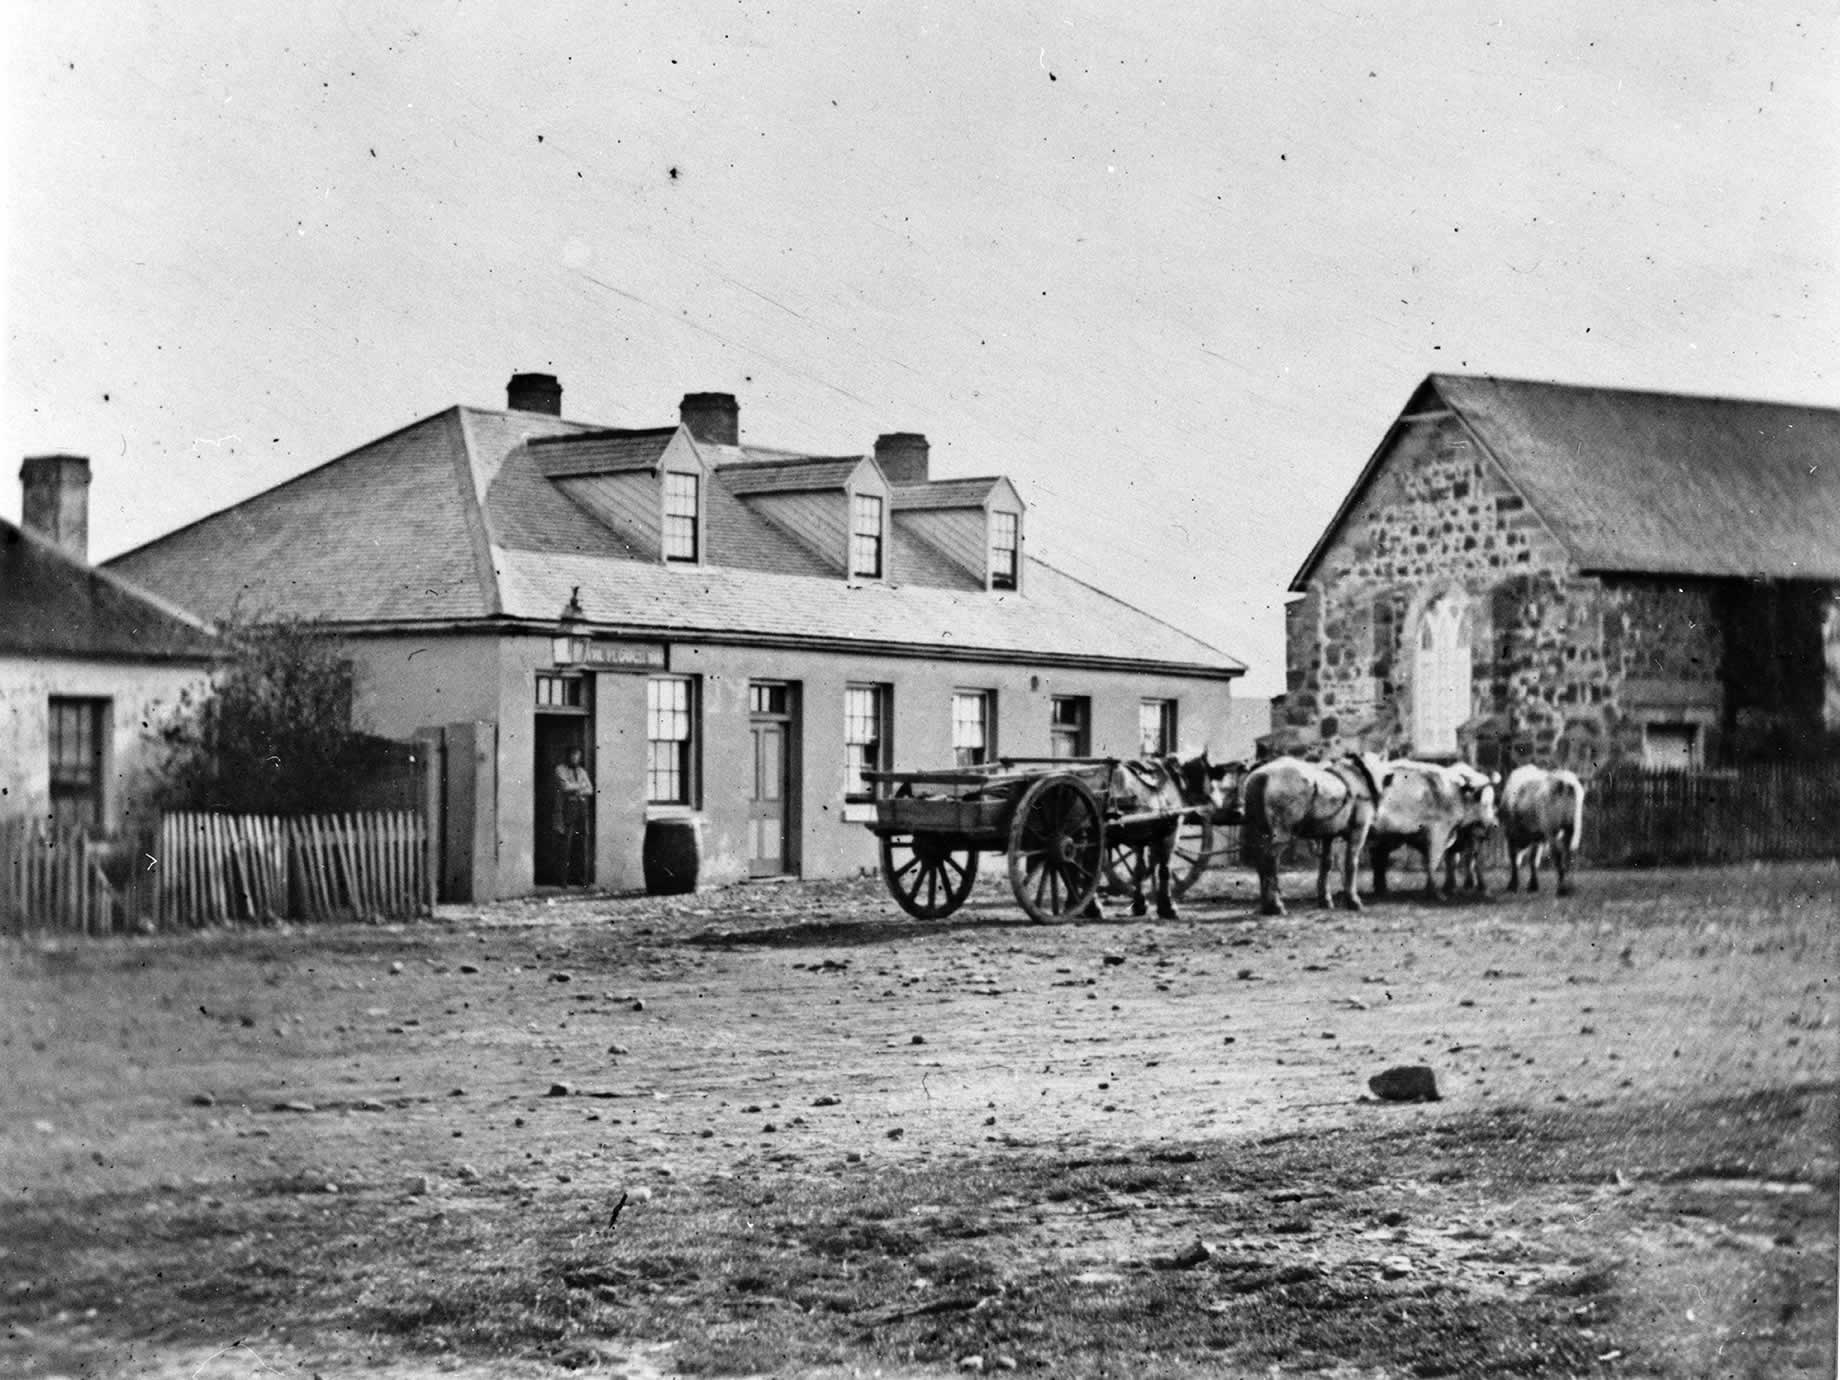 Horse and cart waiting outside the Plough Inn, 1870